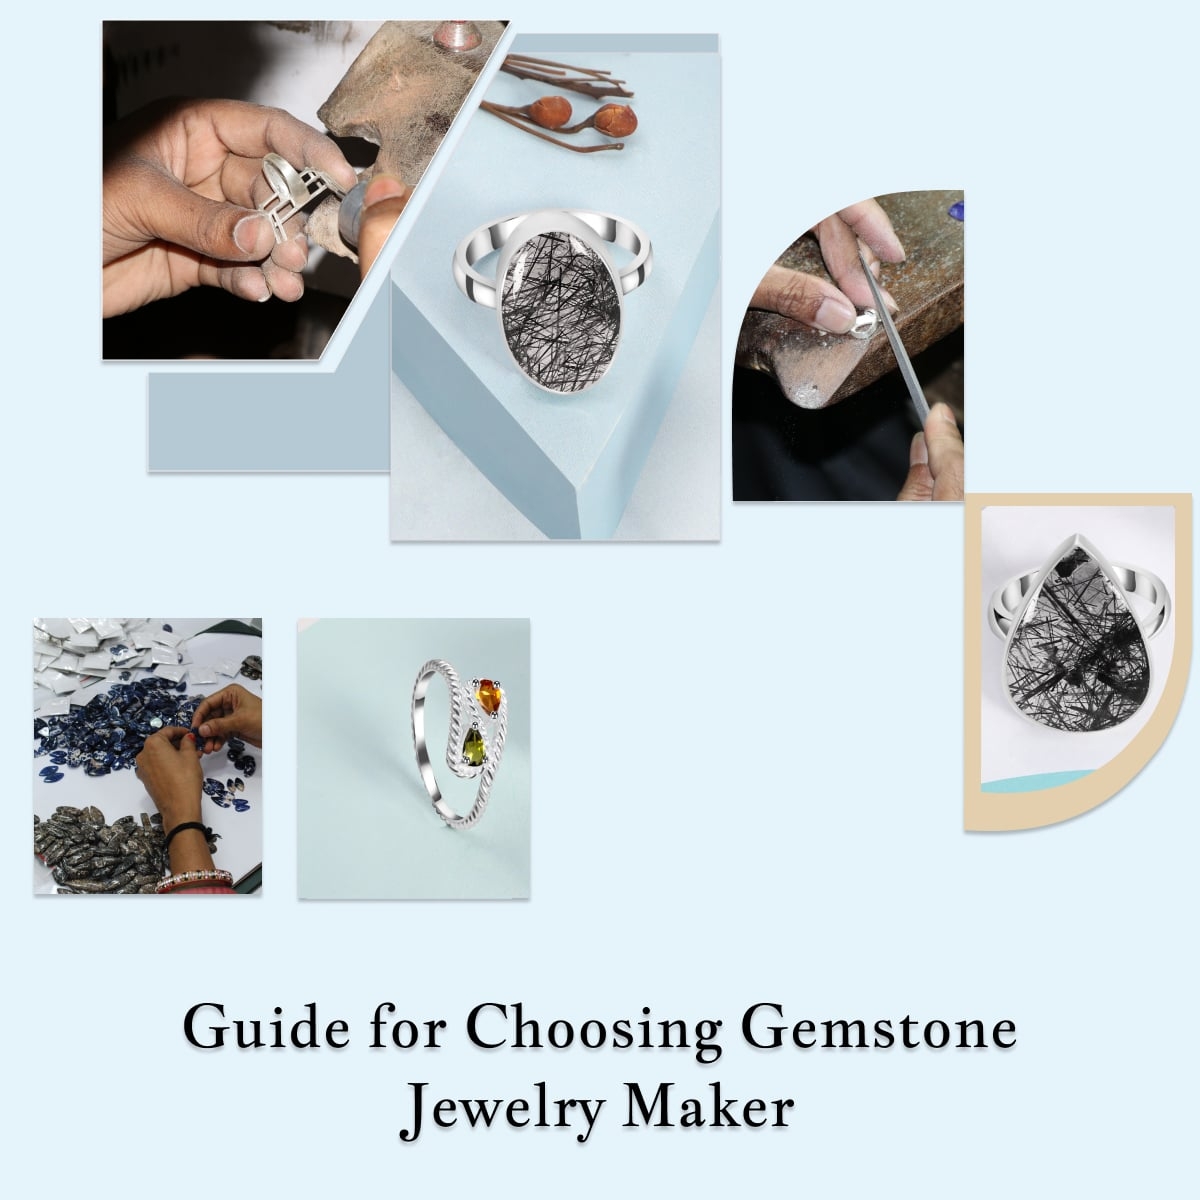 How to Choose Gemstone Jewelry Manufacturer